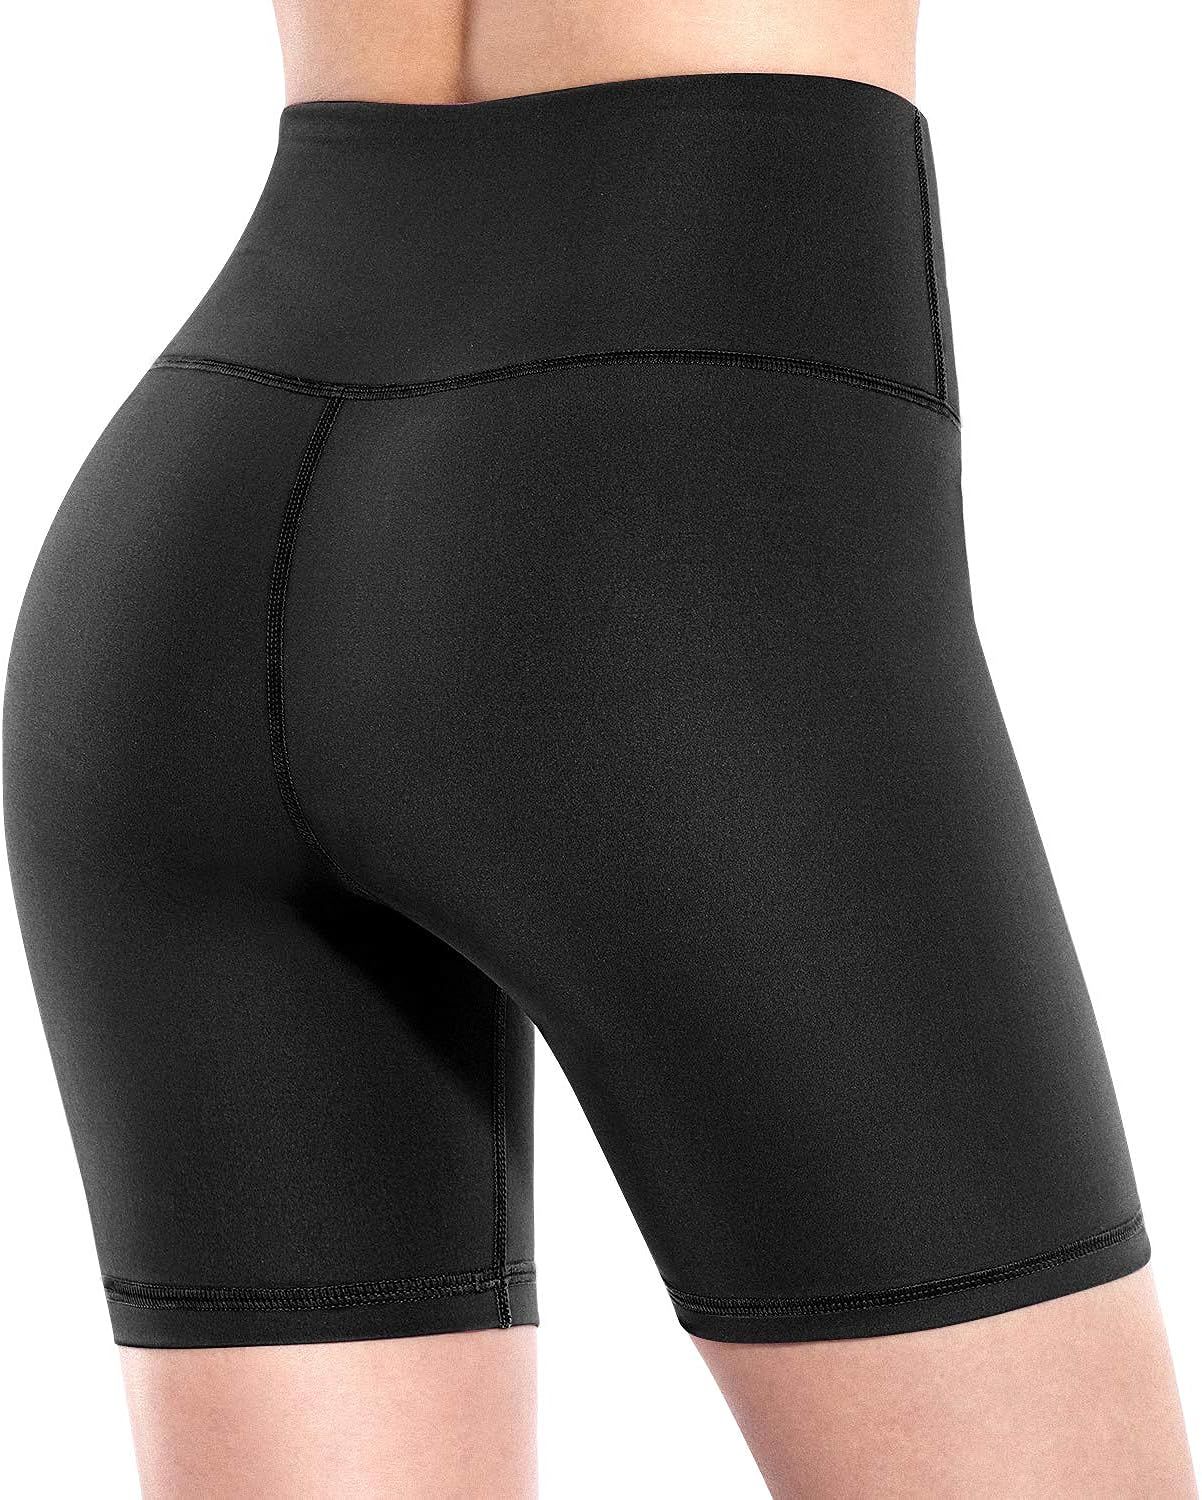 Promover High Waist Biker Yoga Shorts for Women with Pockets Workout Running Compression Shorts 5... | Amazon (US)